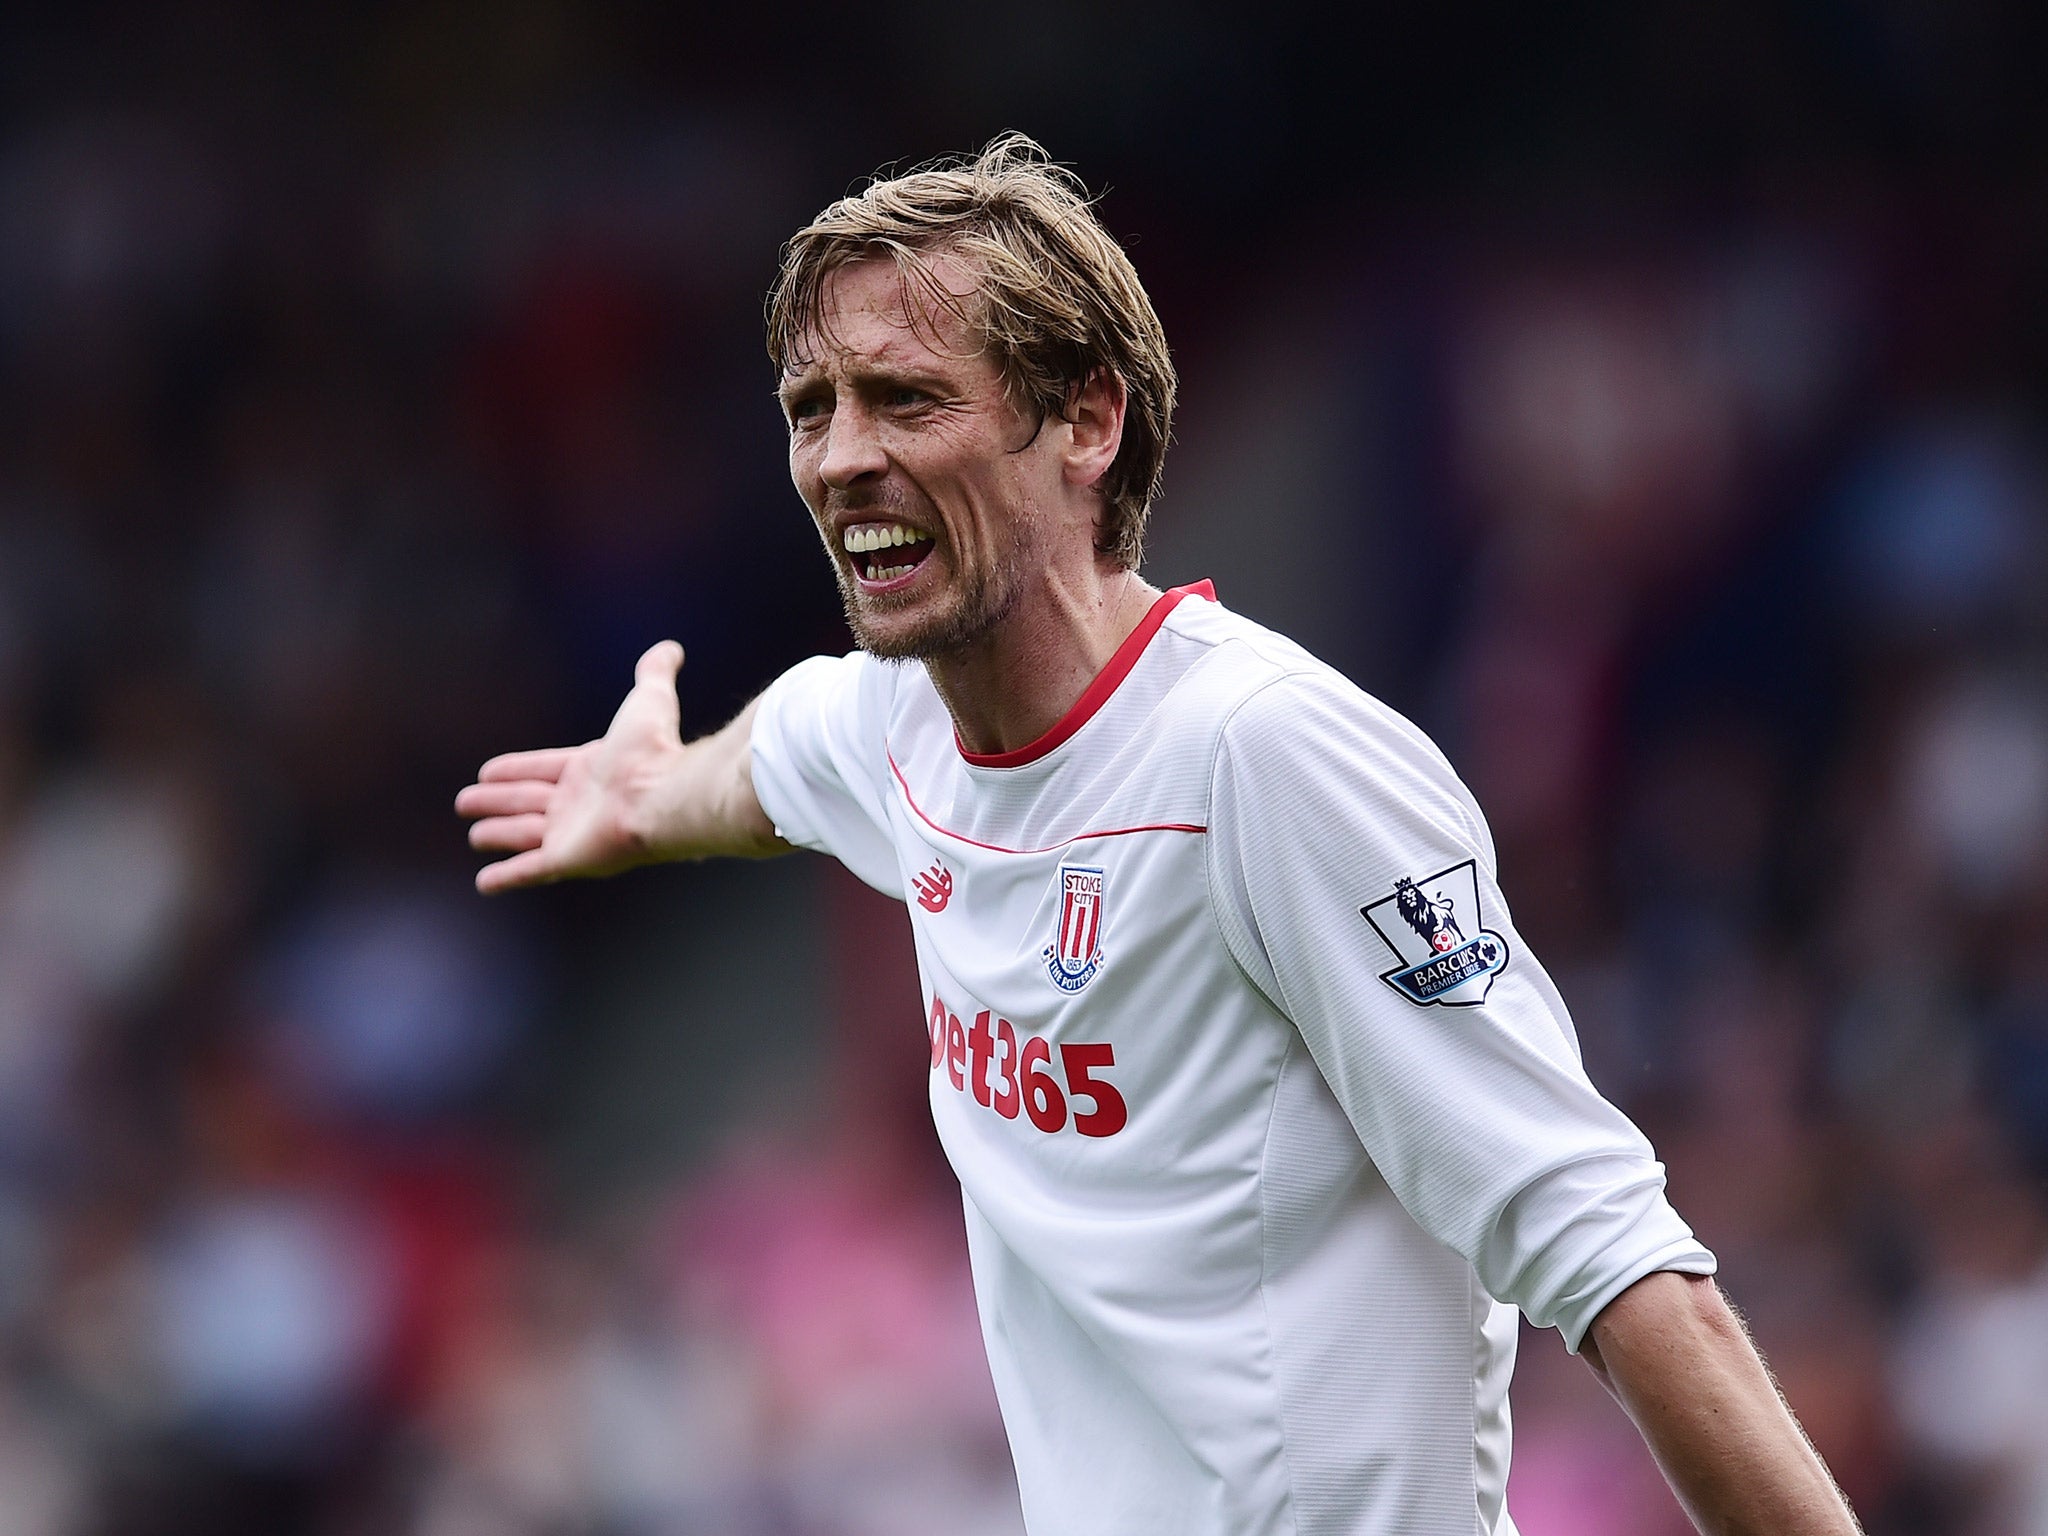 Peter Crouch faces his former club in Tottenham this weekend